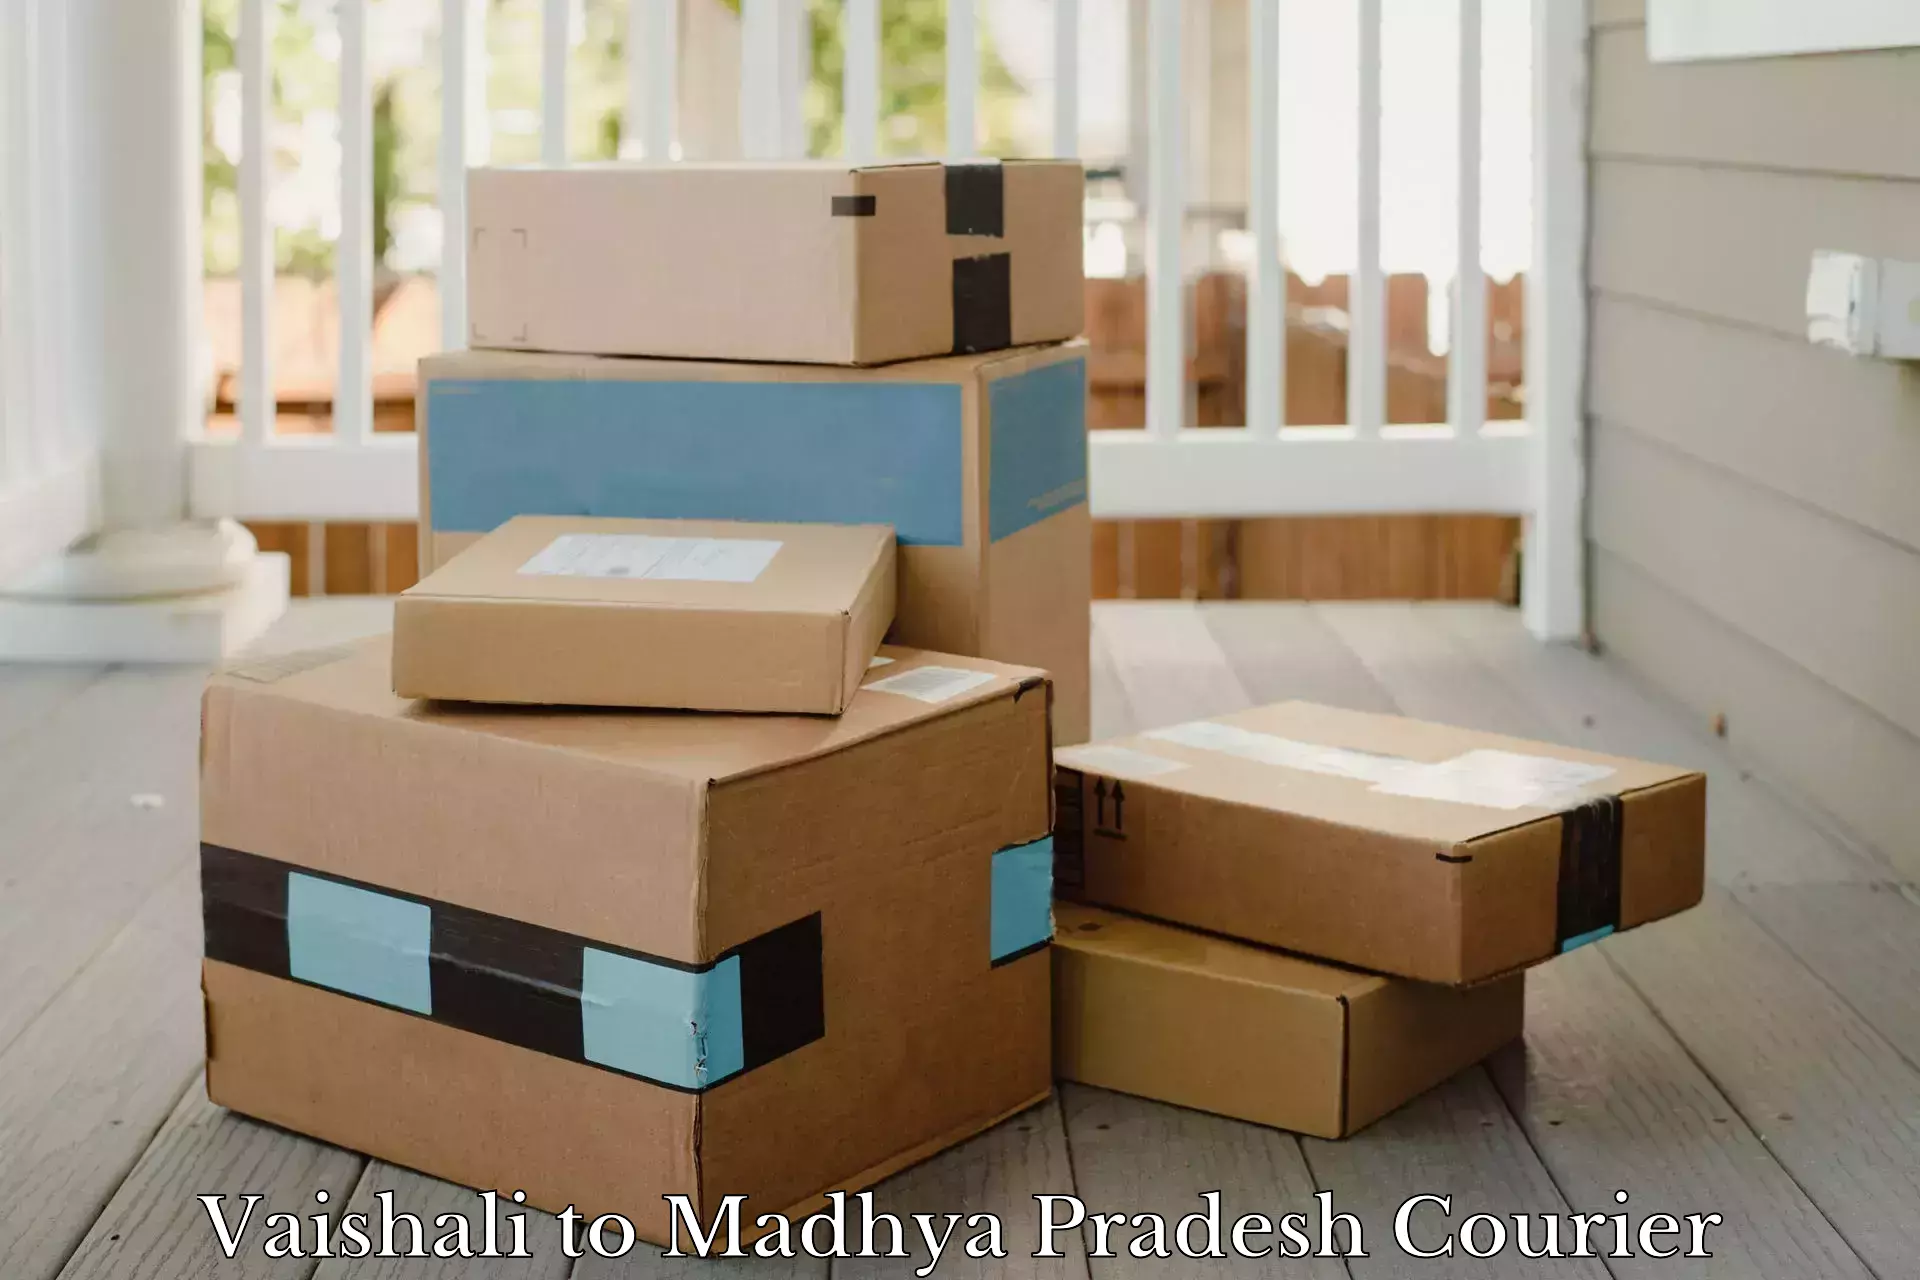 Express delivery capabilities Vaishali to Deosar